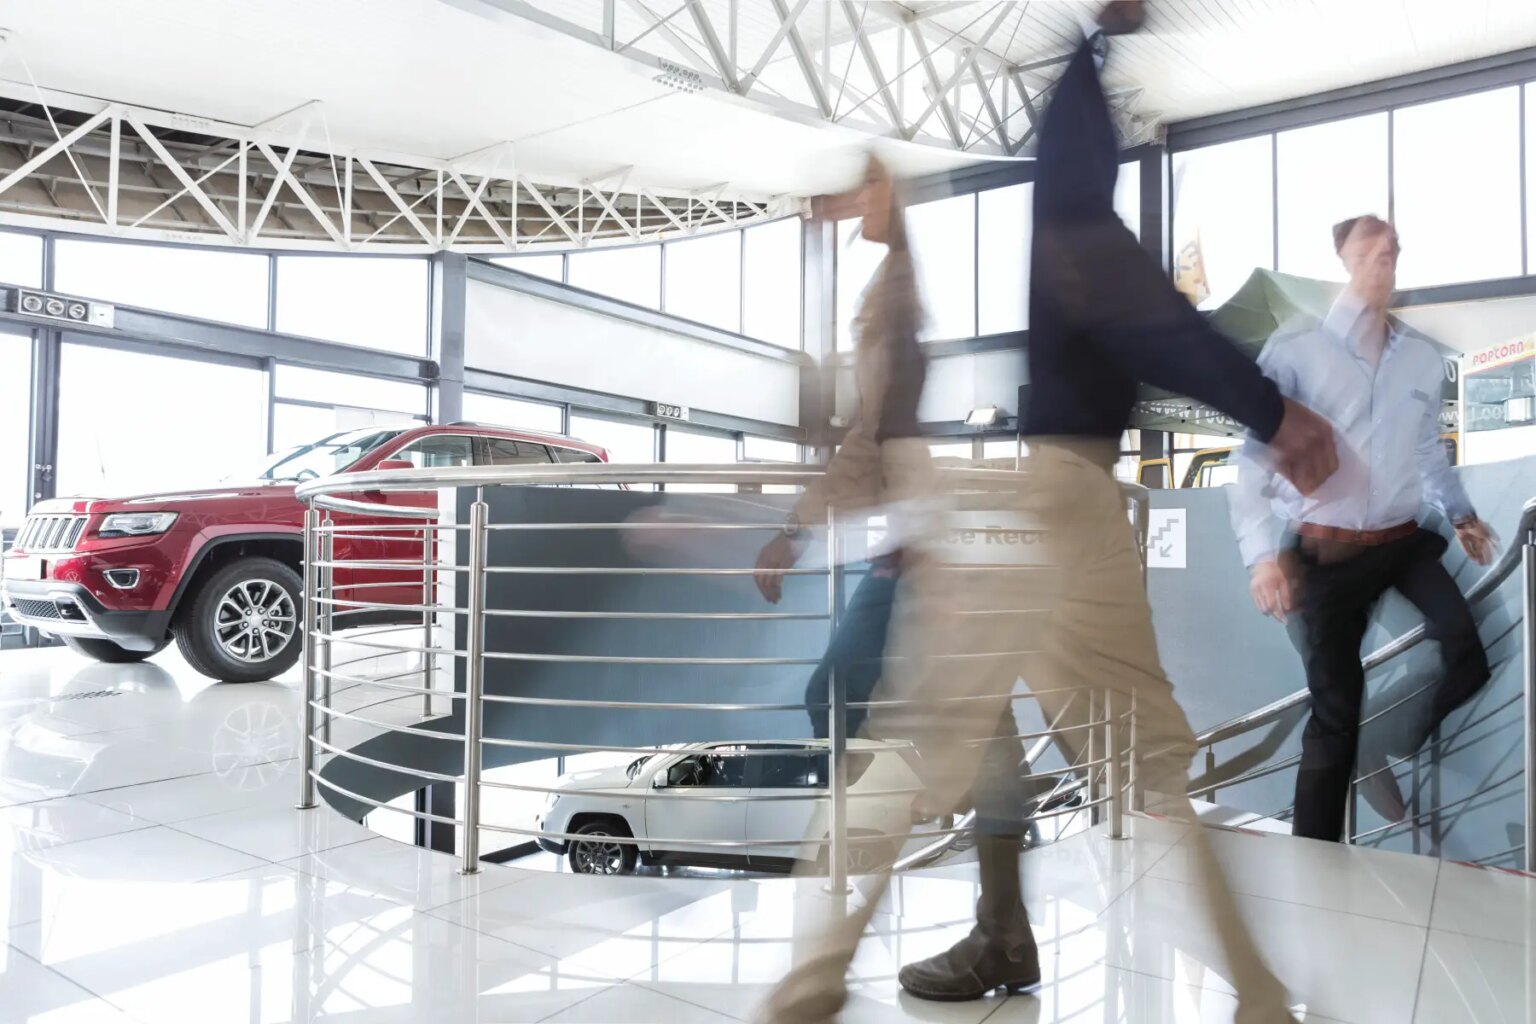 Motion blur of people walking past a car at the dealership